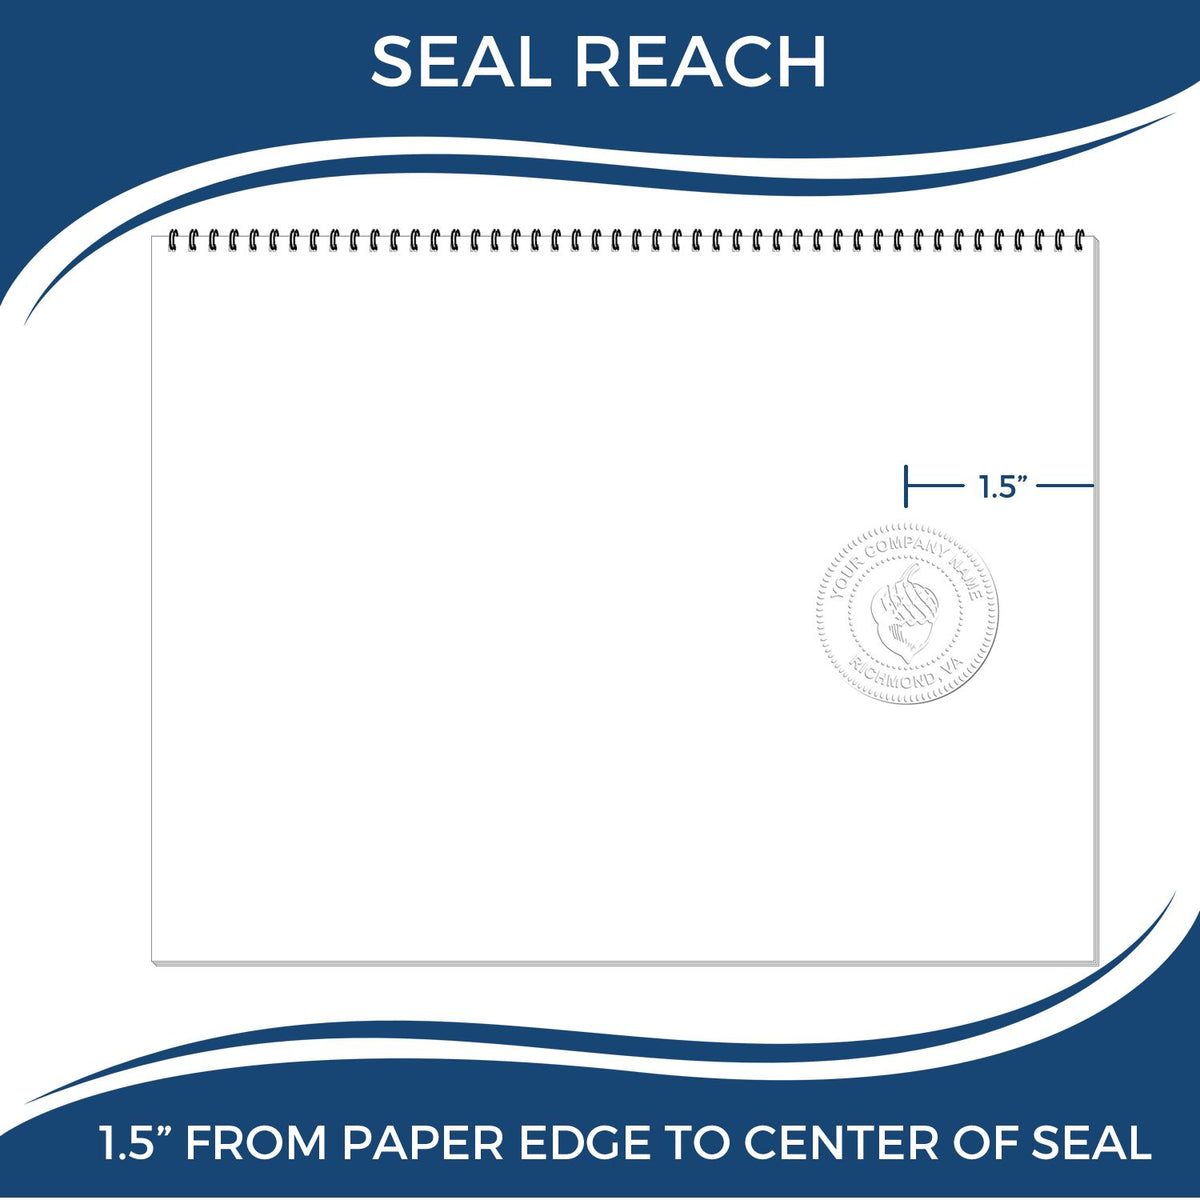 An infographic showing the seal reach which is represented by a ruler and a miniature seal image of the Handheld Maine Professional Geologist Embosser